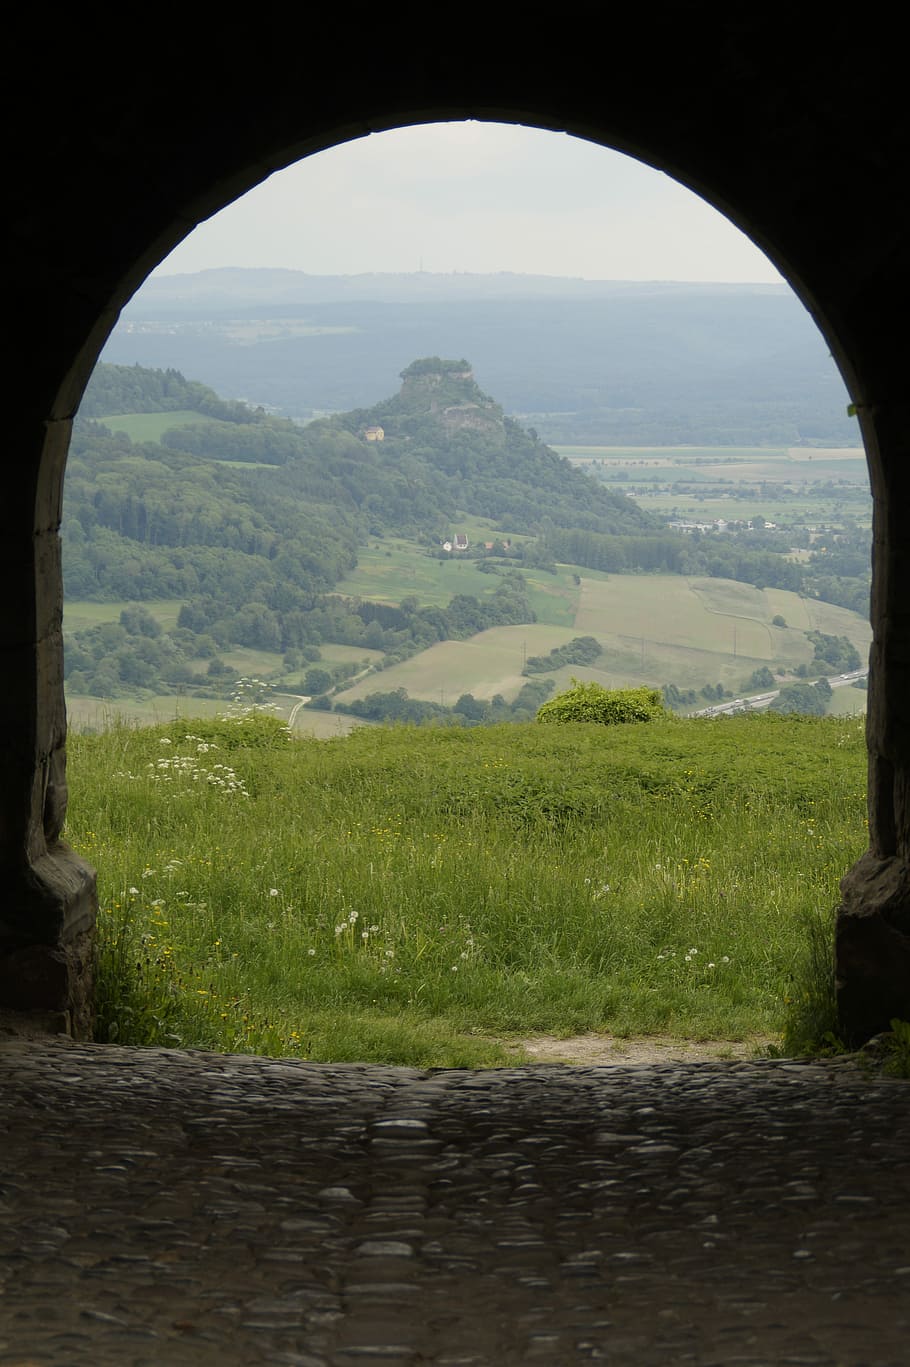 Outlook, Hohentwiel, Hegau, Volcano, volcanic cones, archway, window, goal, distant view, good view